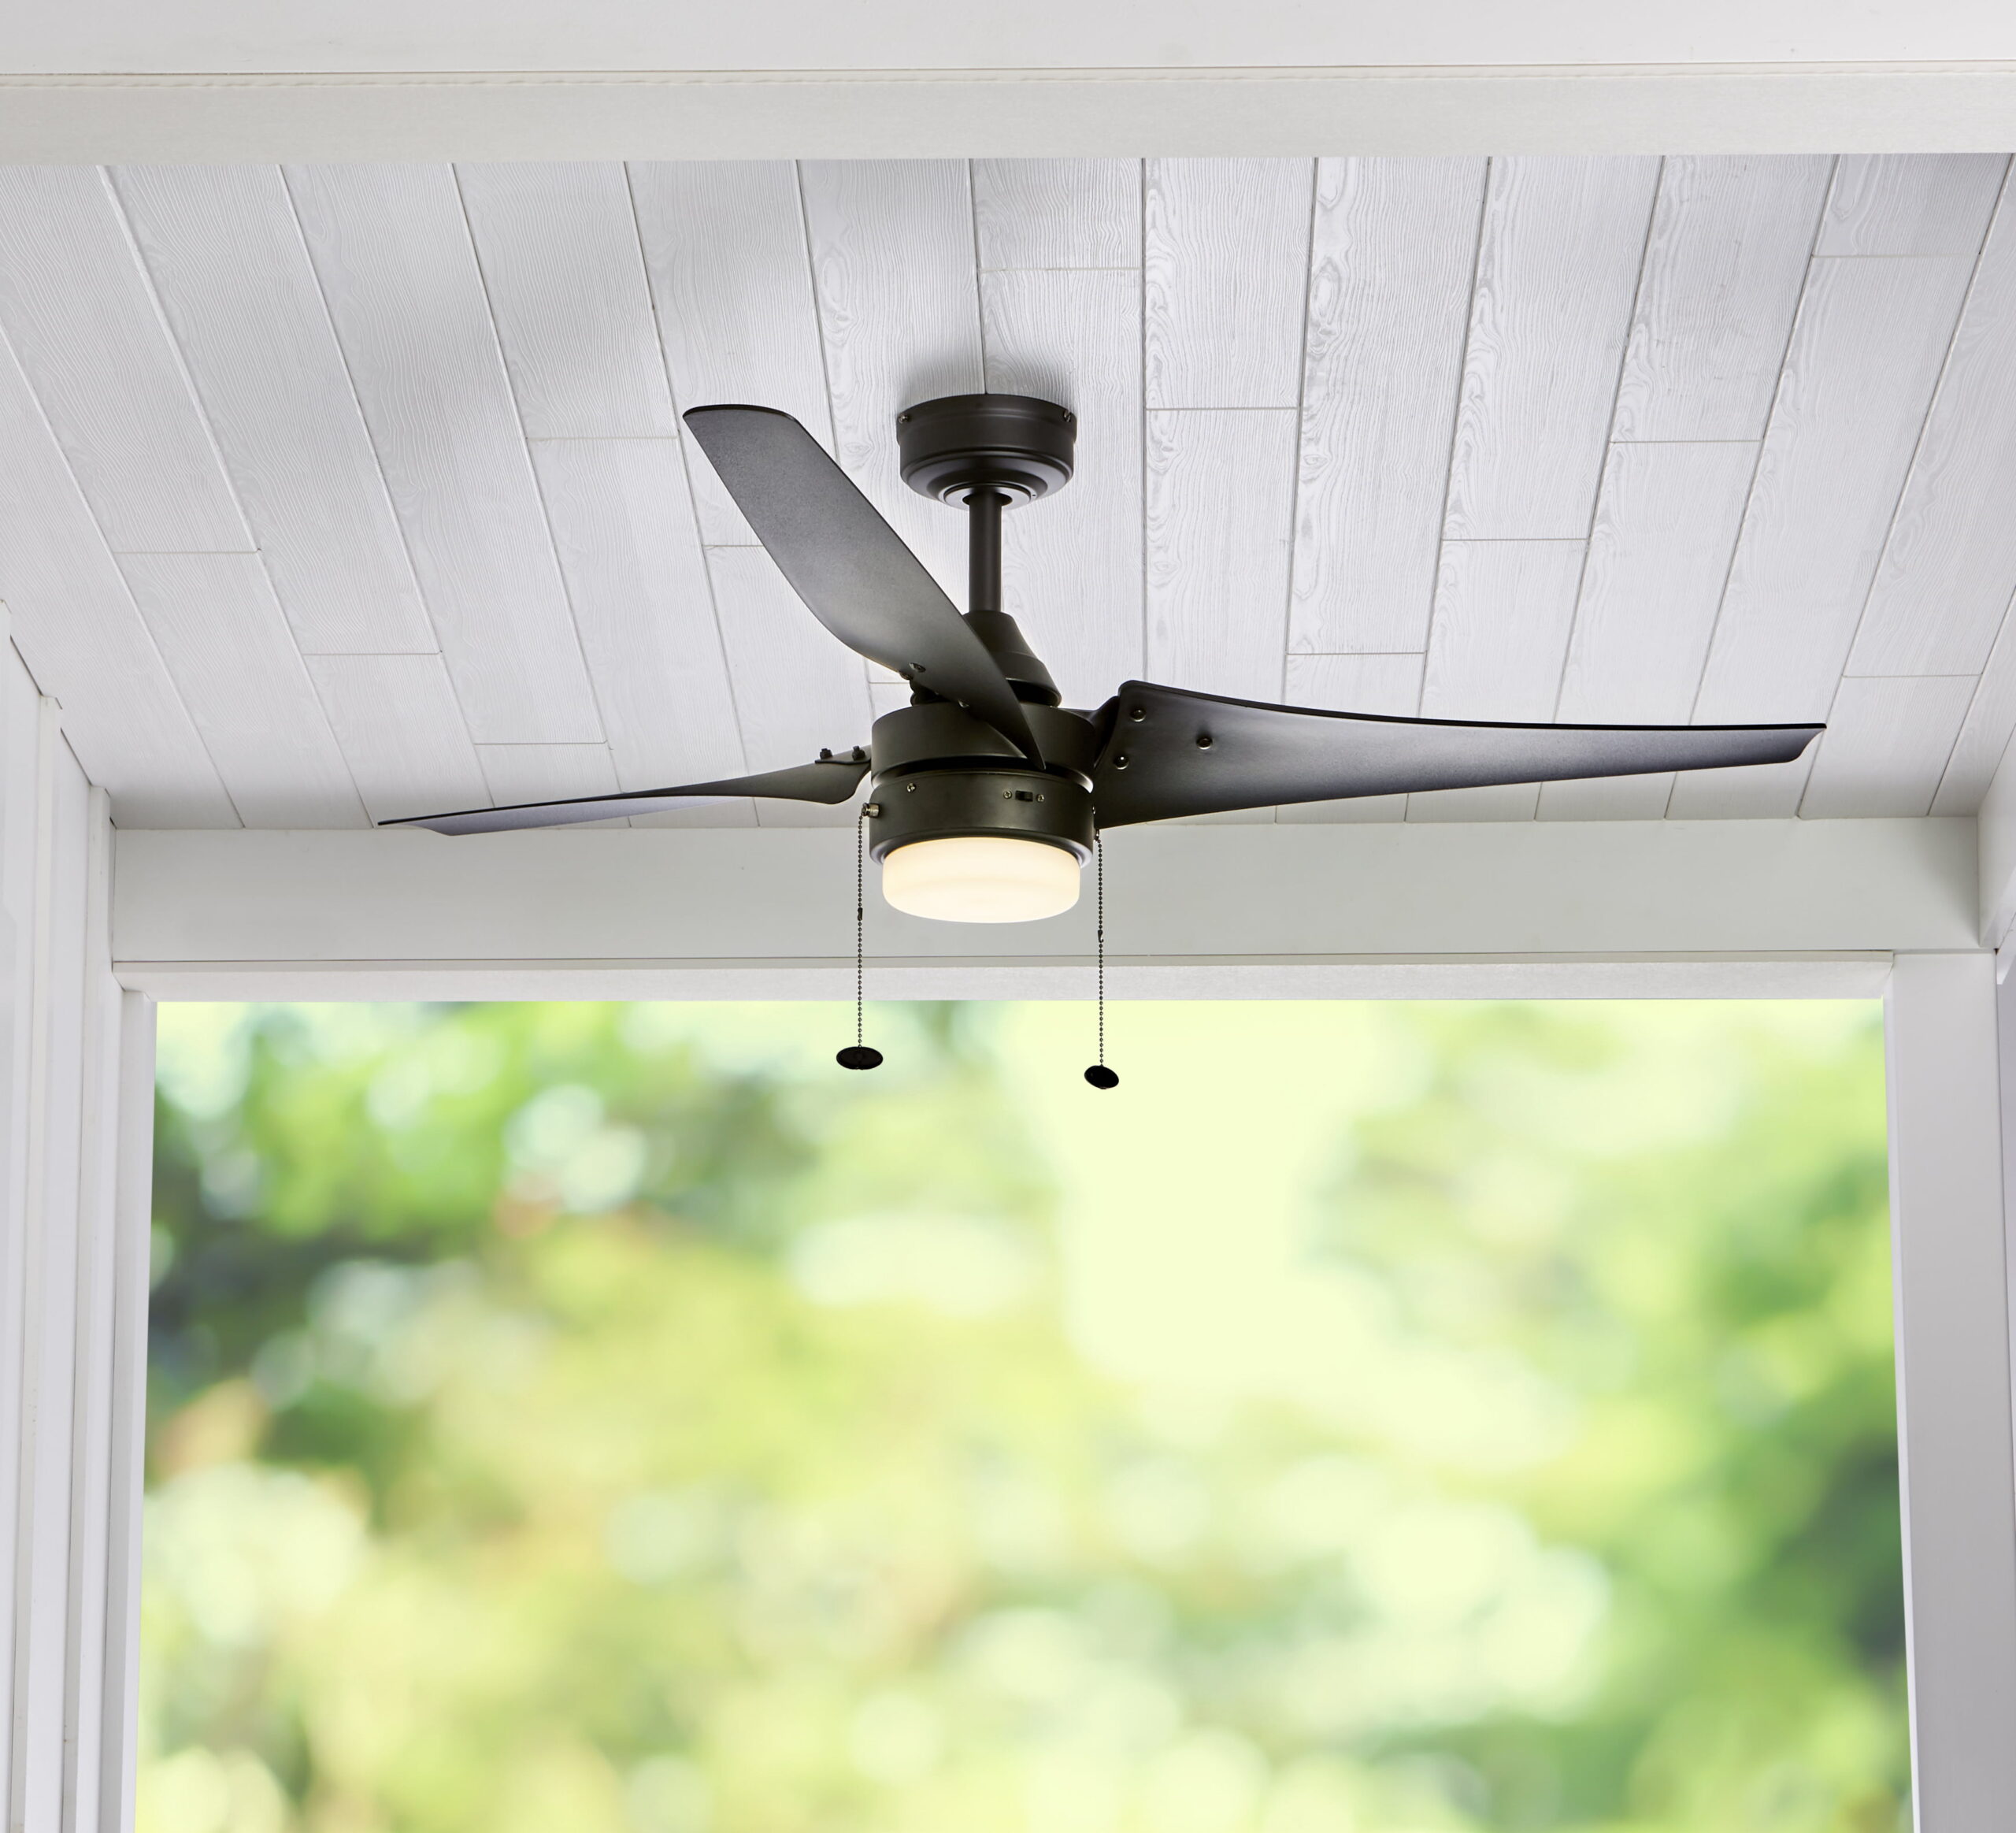 Better Homes and Gardens 56” Black Indoor/Outdoor Ceiling Fan with 3 Blades， Light Kit， Pull Chains and Reverse Airflow